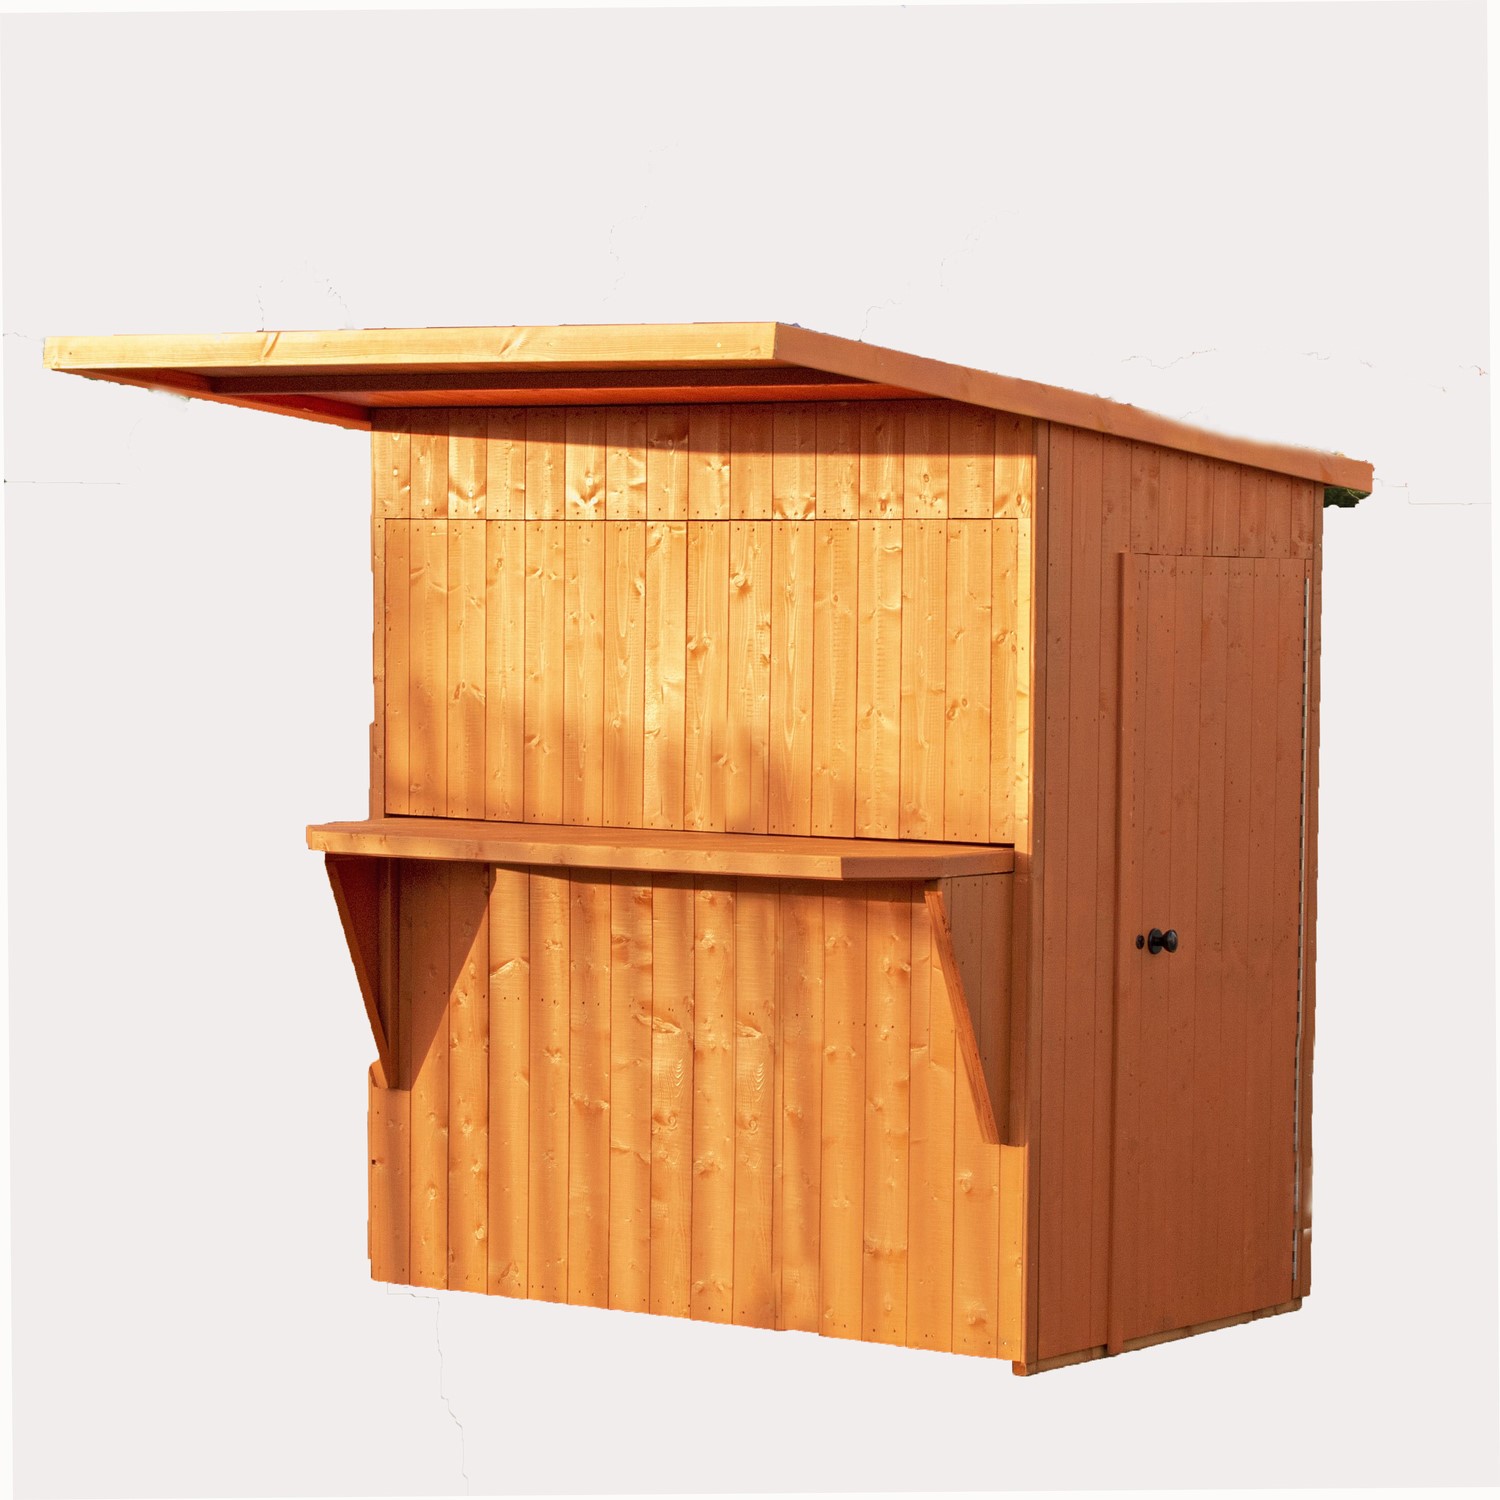 Read more about Shire pent wooden garden bar and store 6 x 4ft